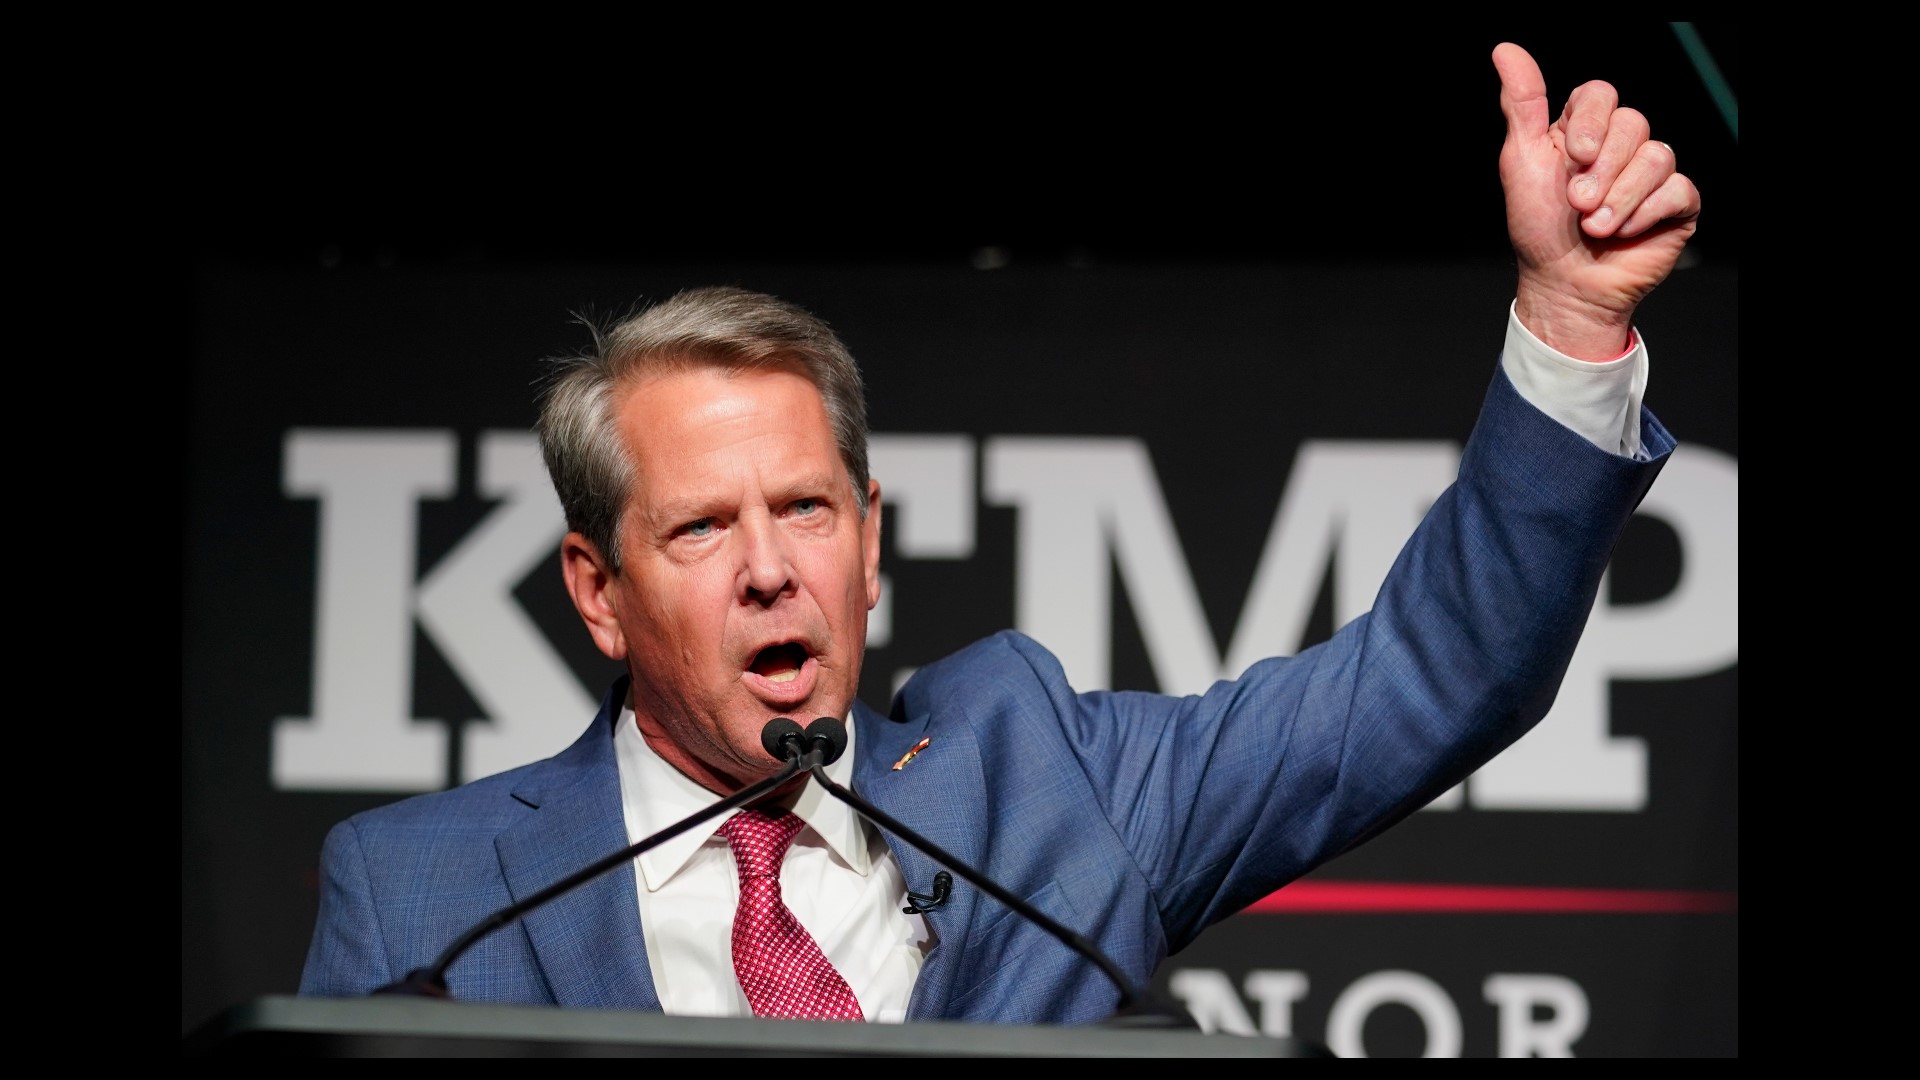 Gov. Kemp has filed a motion to quash his subpoena before the special grand jury, a matter that will be heard in court on Thursday.